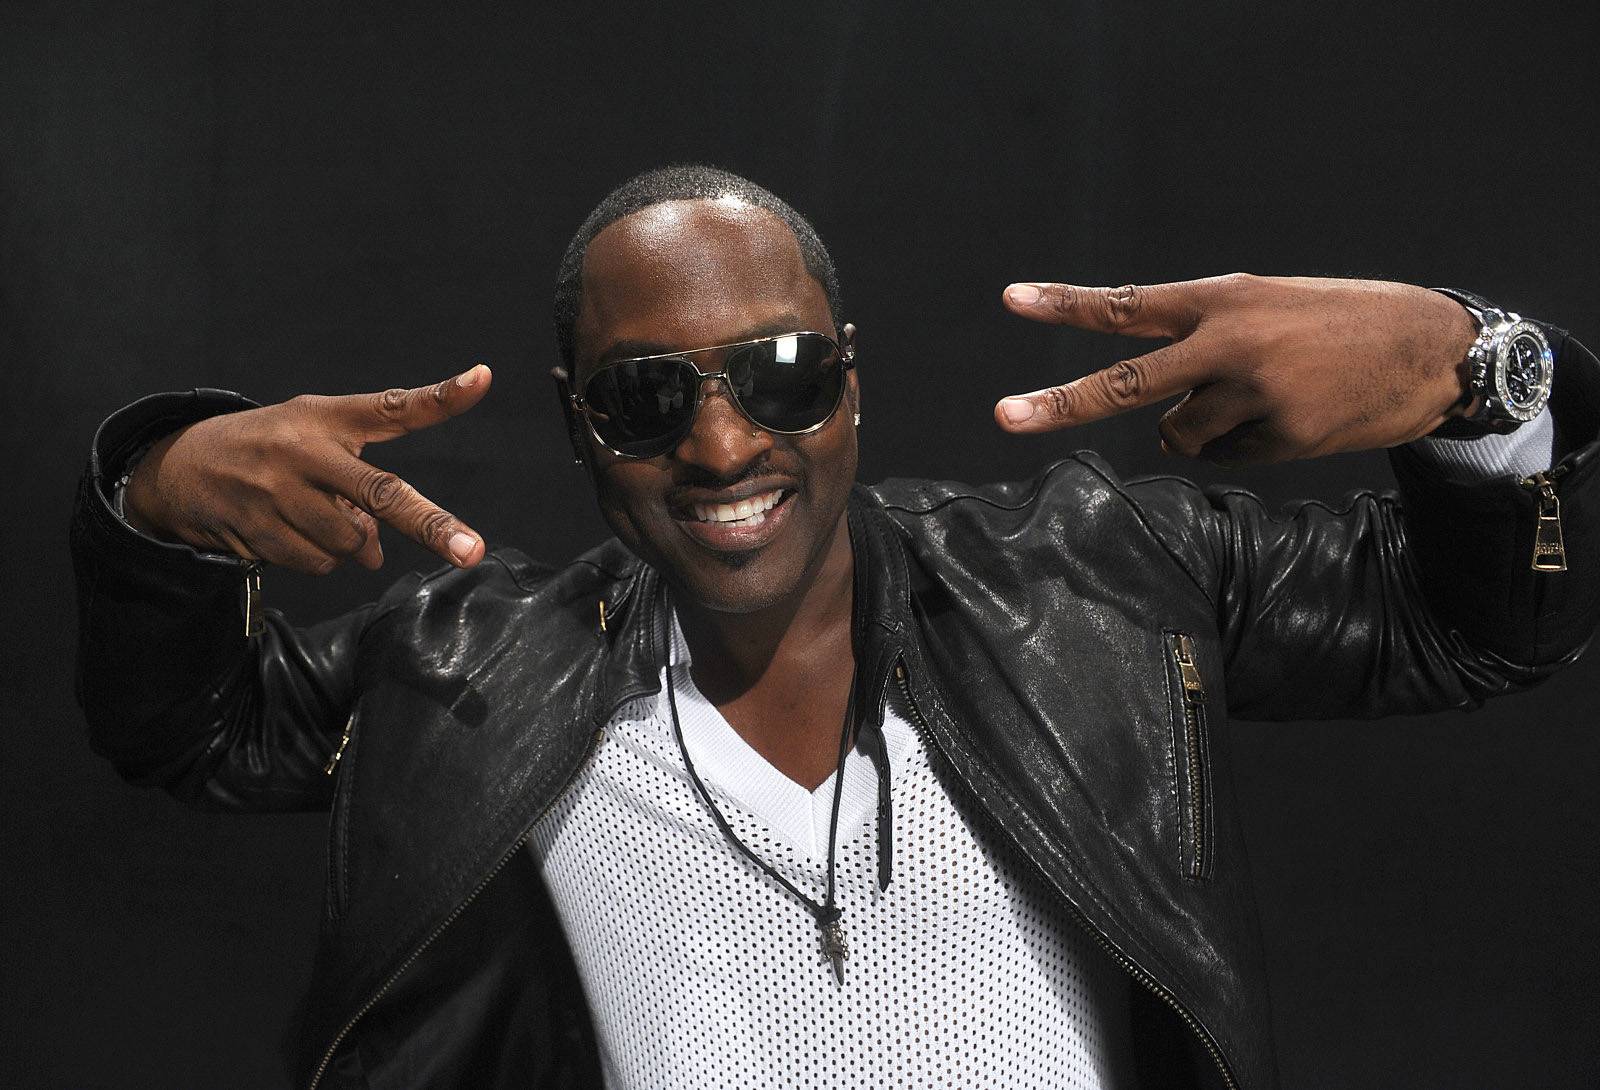 Johnny Gill on Talking to Bobby Brown About New Edition Reunion&nbsp; - “I talked to Bob about it and it’s like: You got to come with your ‘A’ game every night. One good show ain’t gonna convince people. Because, remember — Bobby had the reputation of not showing up, not being good in a city along with all the other stuff.”(Photo: Brad Barket/PictureGroup)